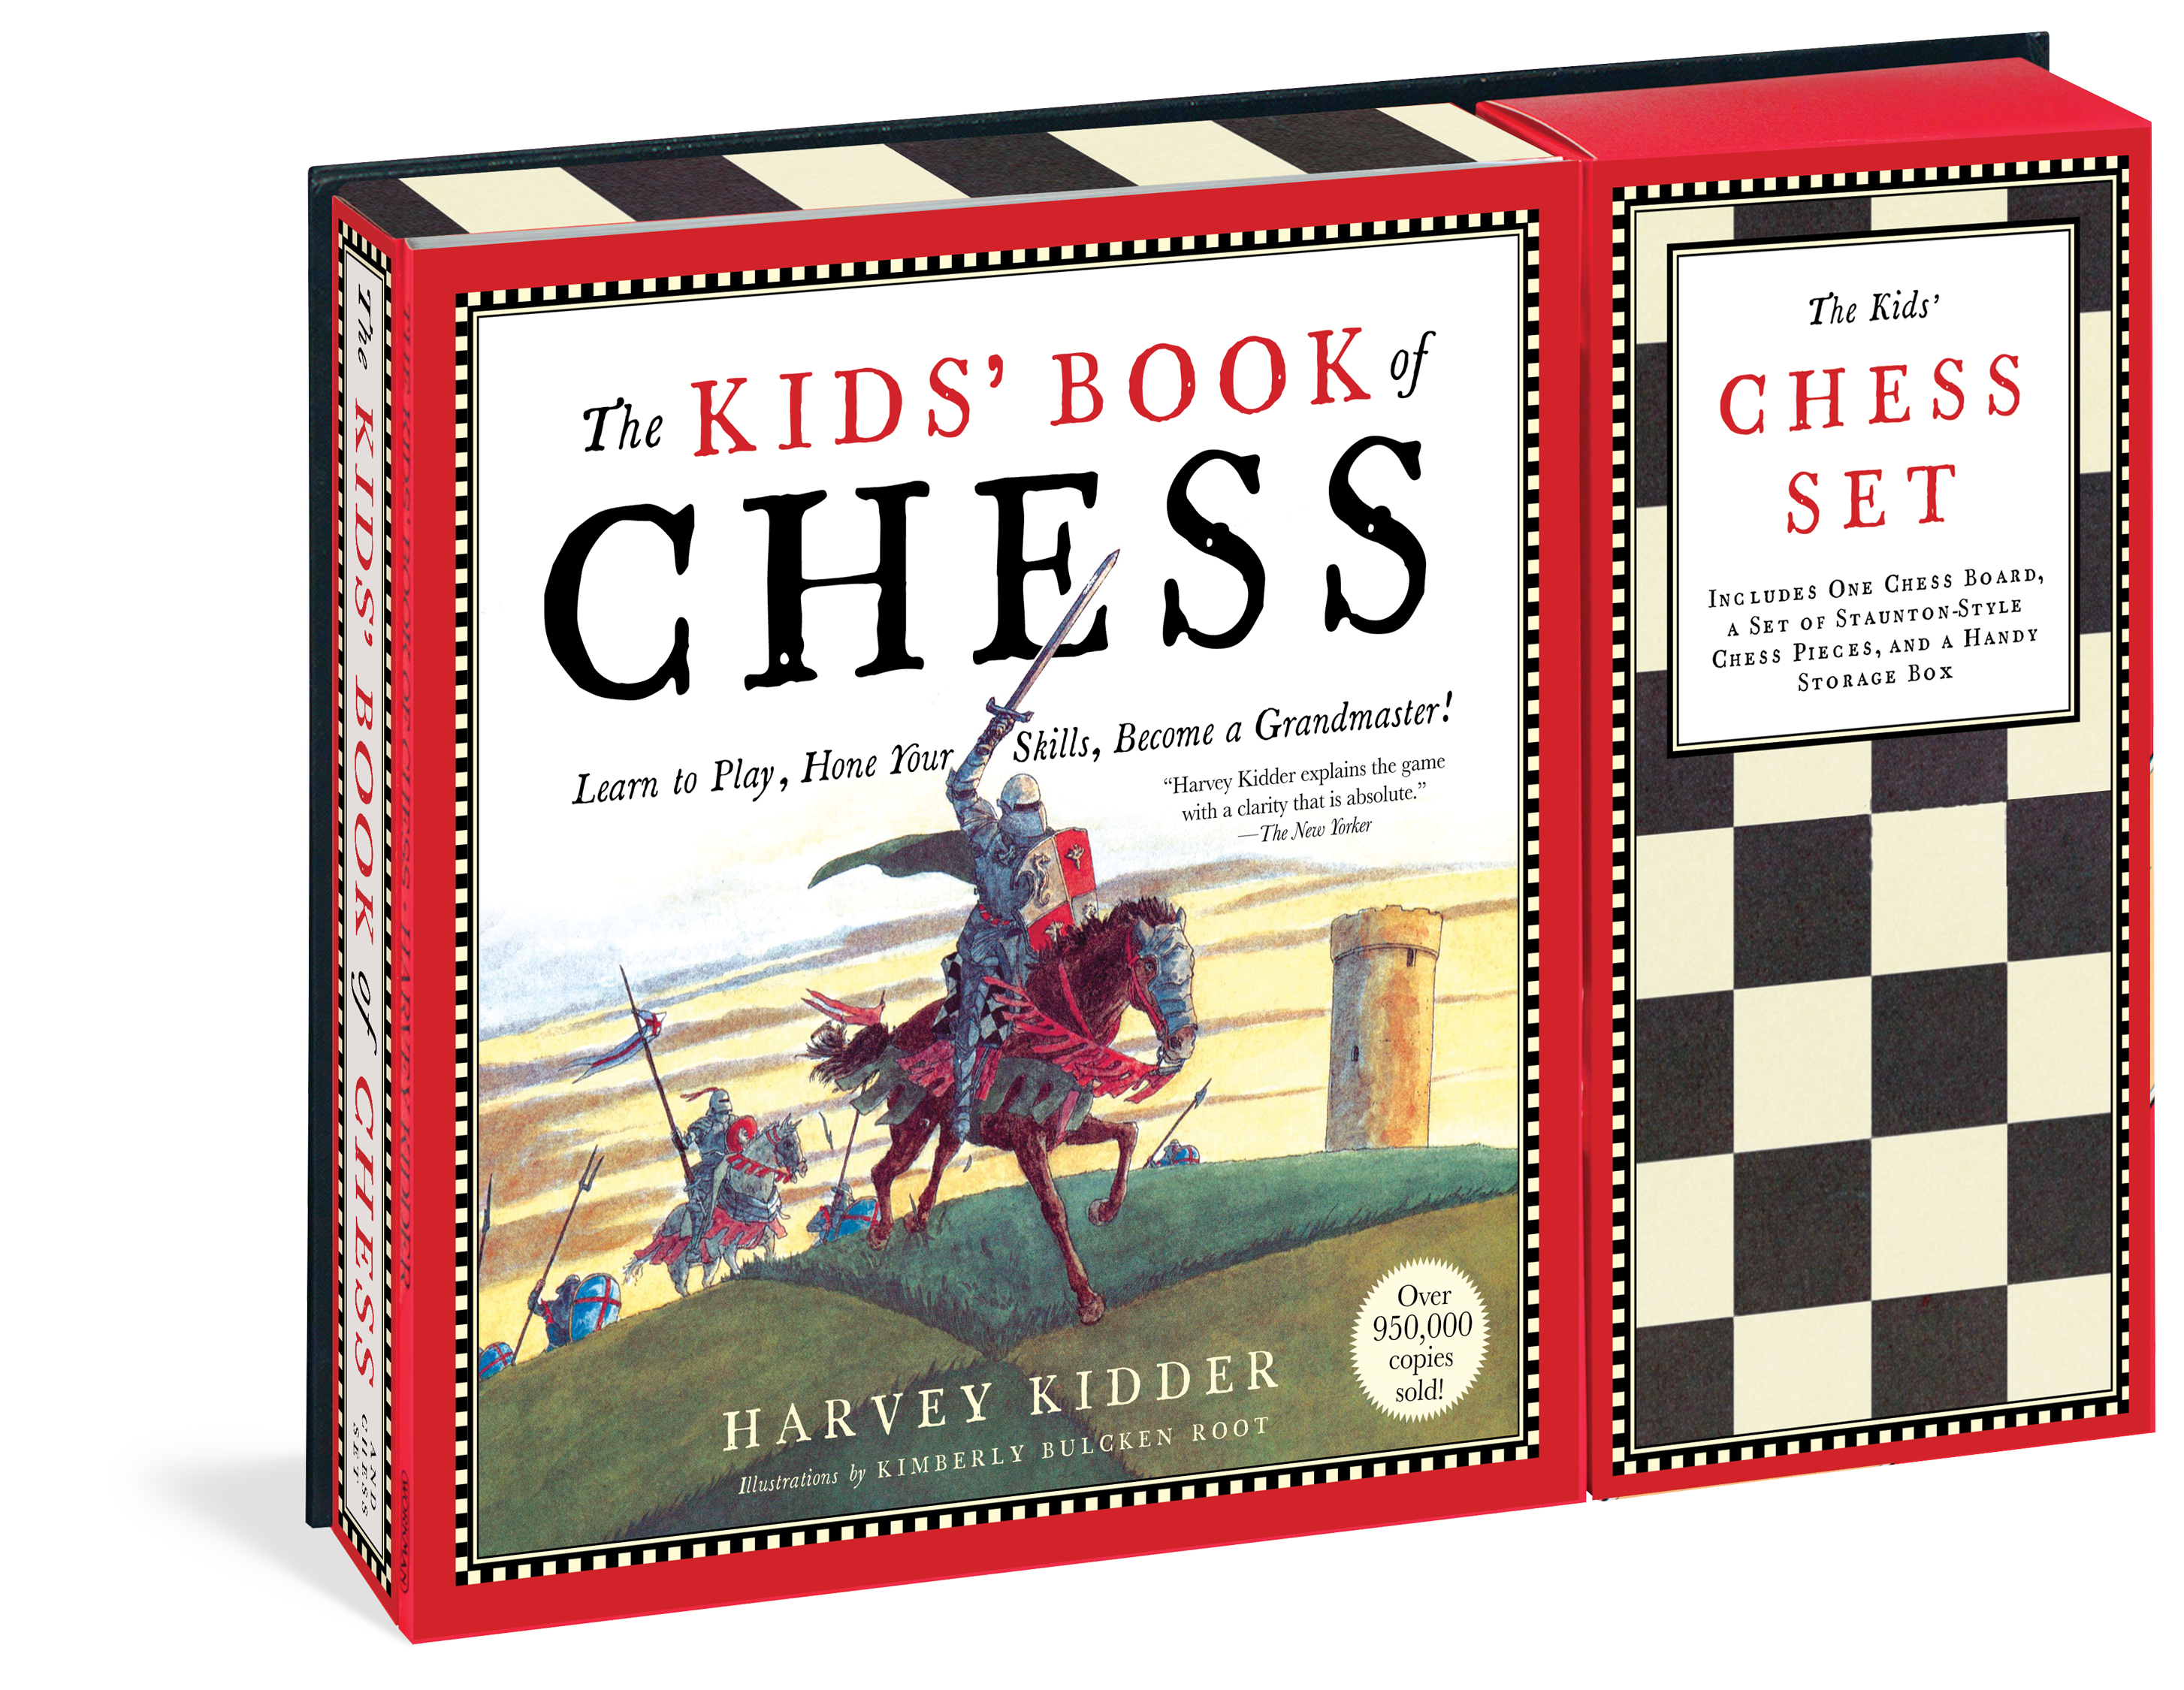 The Kids' Book of Chess & Set